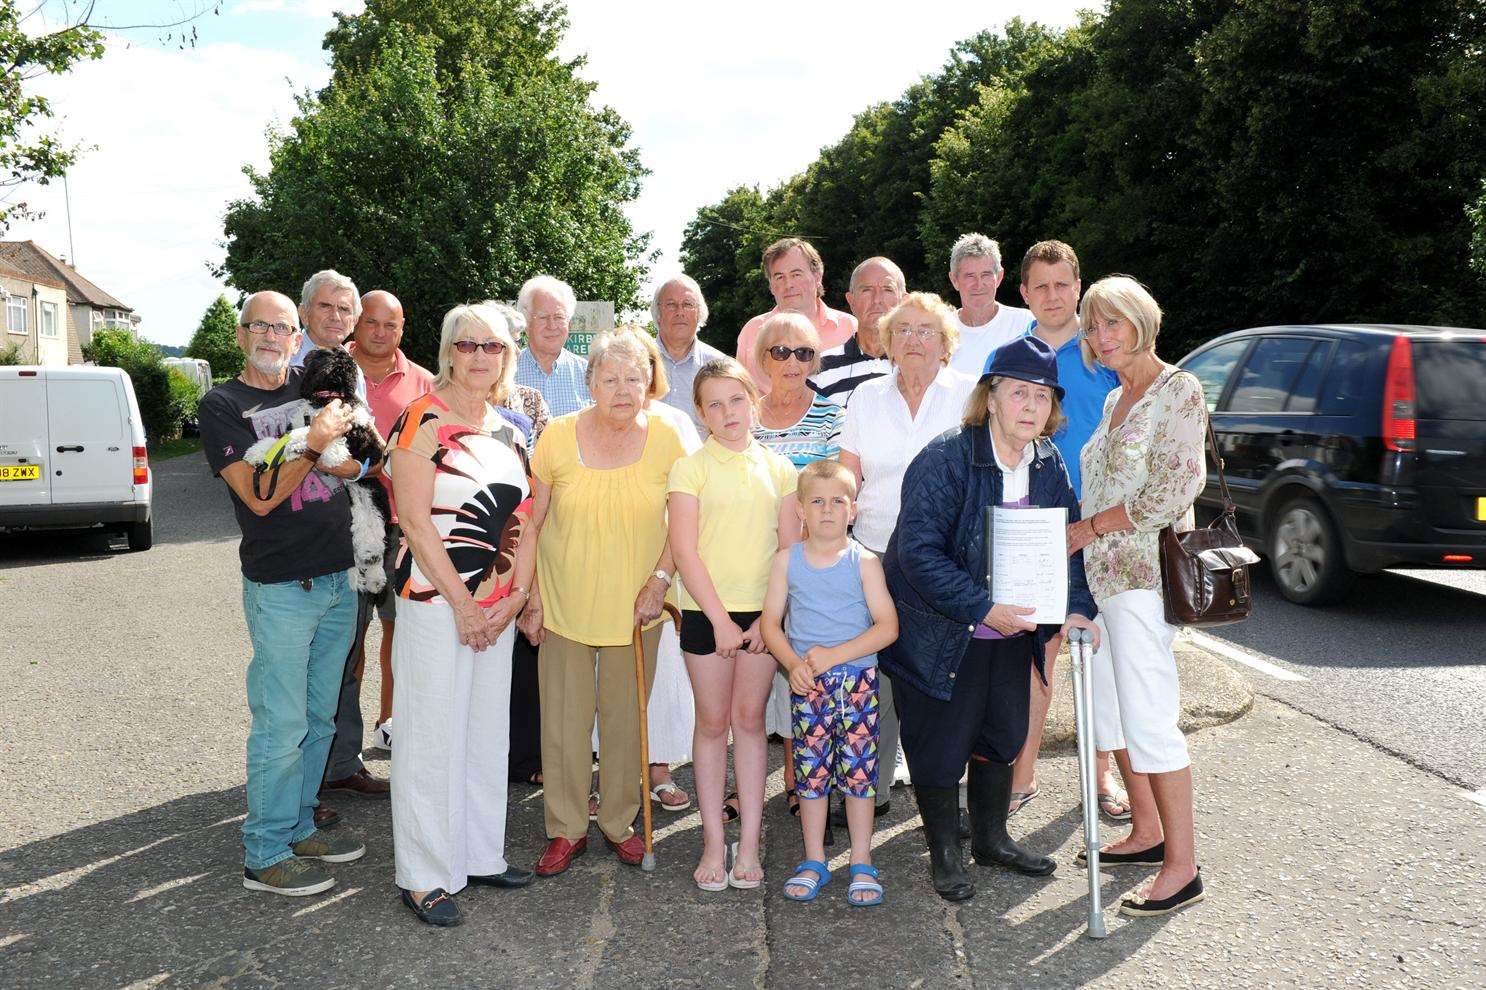 Residents road petition for lower speed limit at Dartford Road.